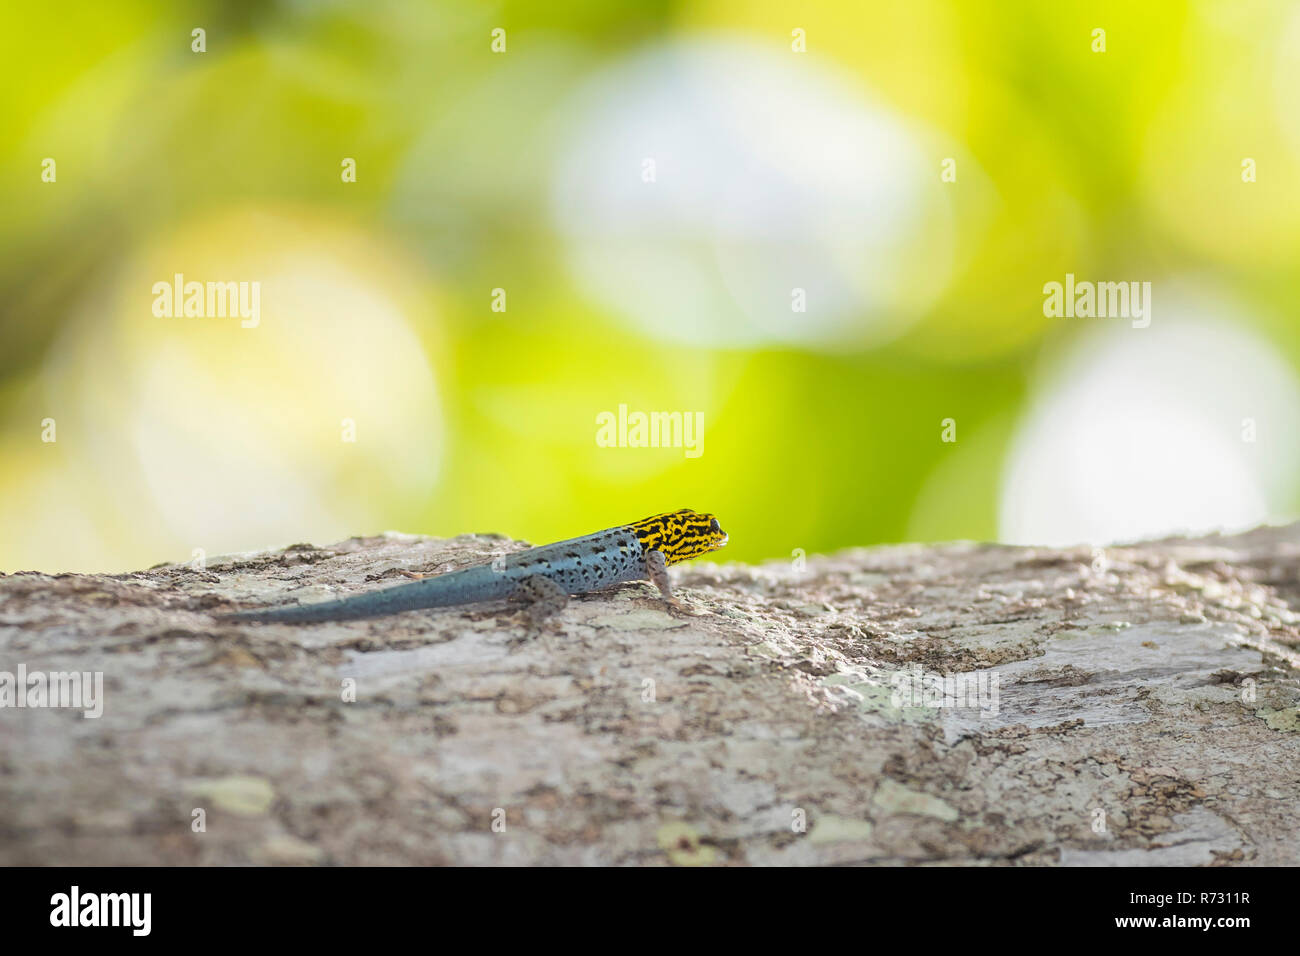 Closeup of a yellow-headed dwarf gecko or dwarf yellow-headed gecko Lygodactylus luteopicturatus climbing a tree in a sunny jungle forest. Stock Photo